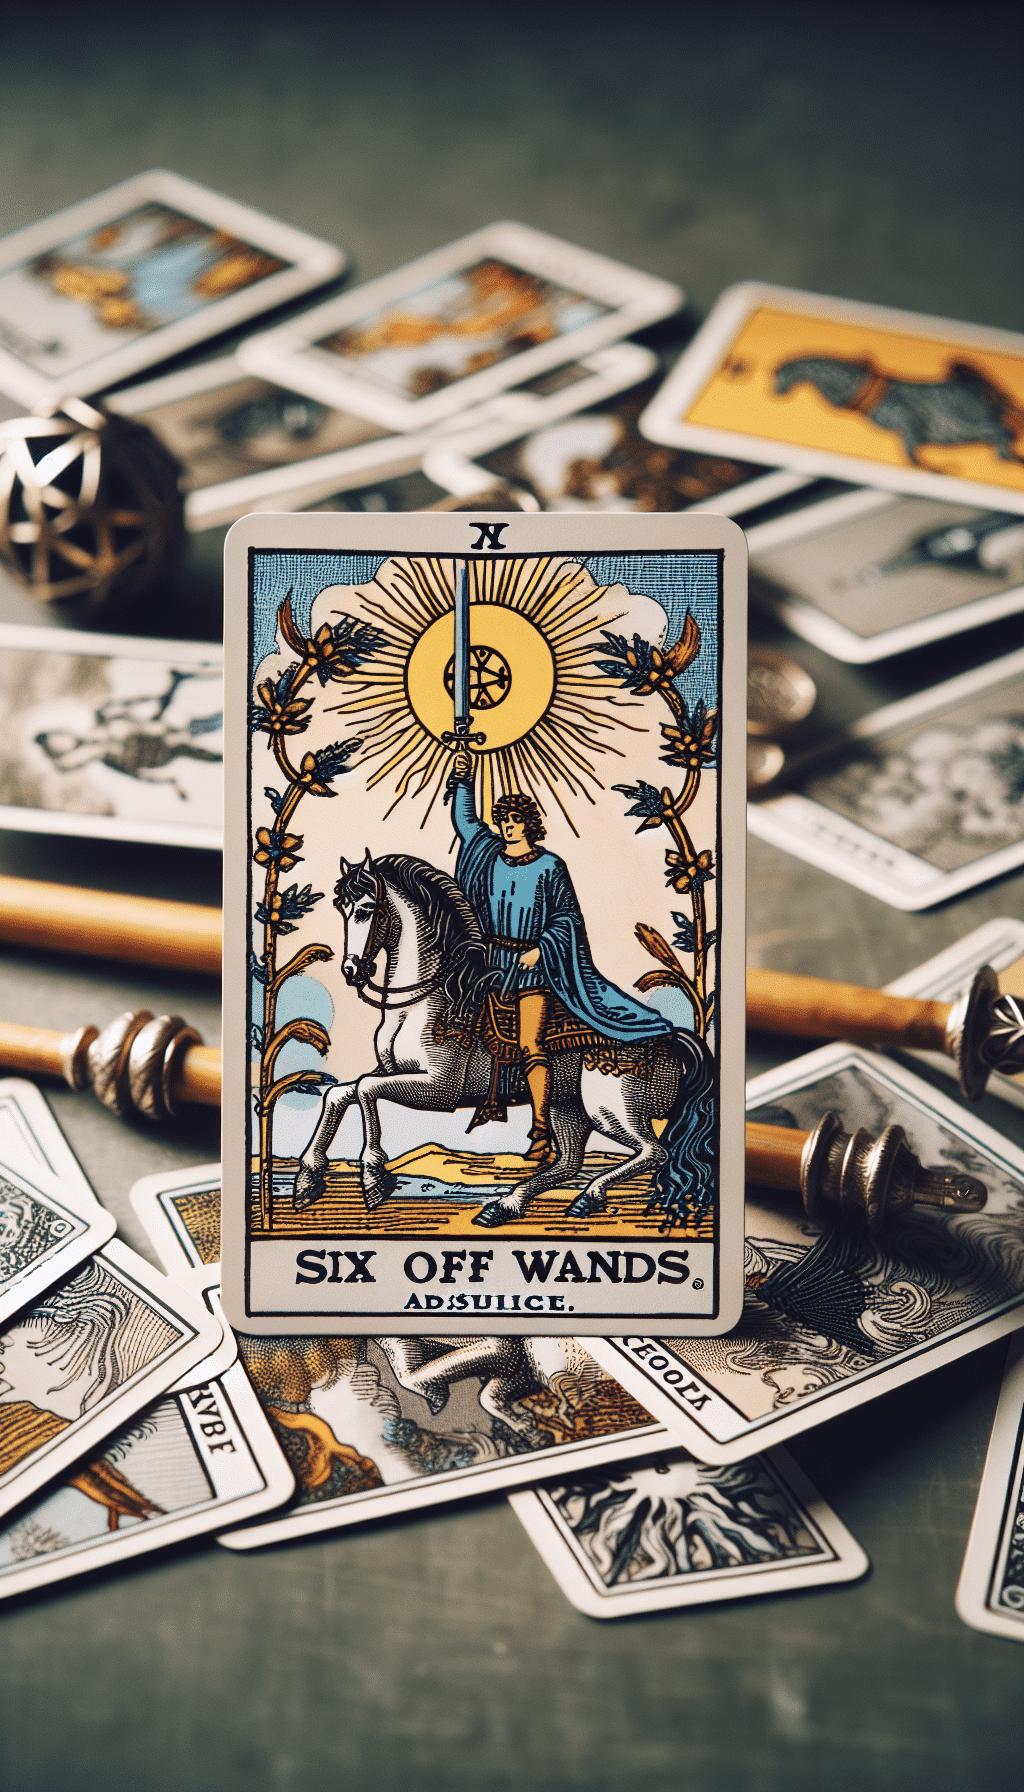 Six of Wands: Embracing Victory and Recognition